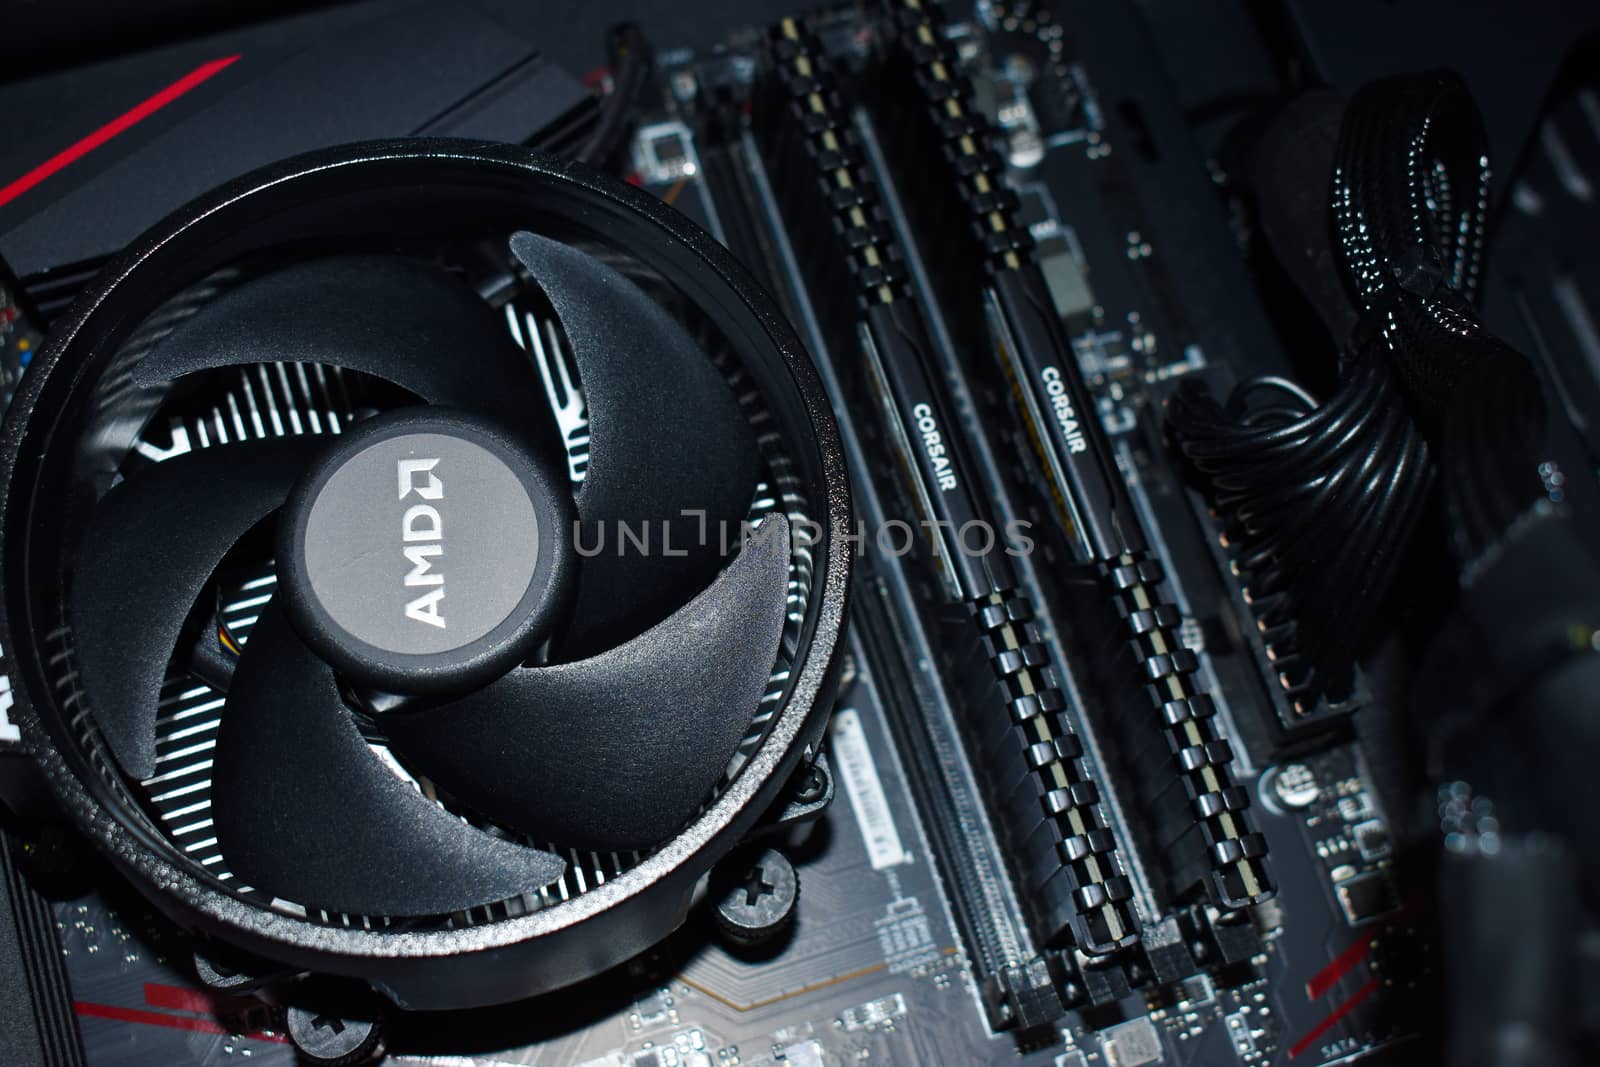 Dublin, Ireland - April 16th 2020: Close up view of an AMD Ryzen 3600 processor and Corsair RAM in a gaming PC by benentaylor